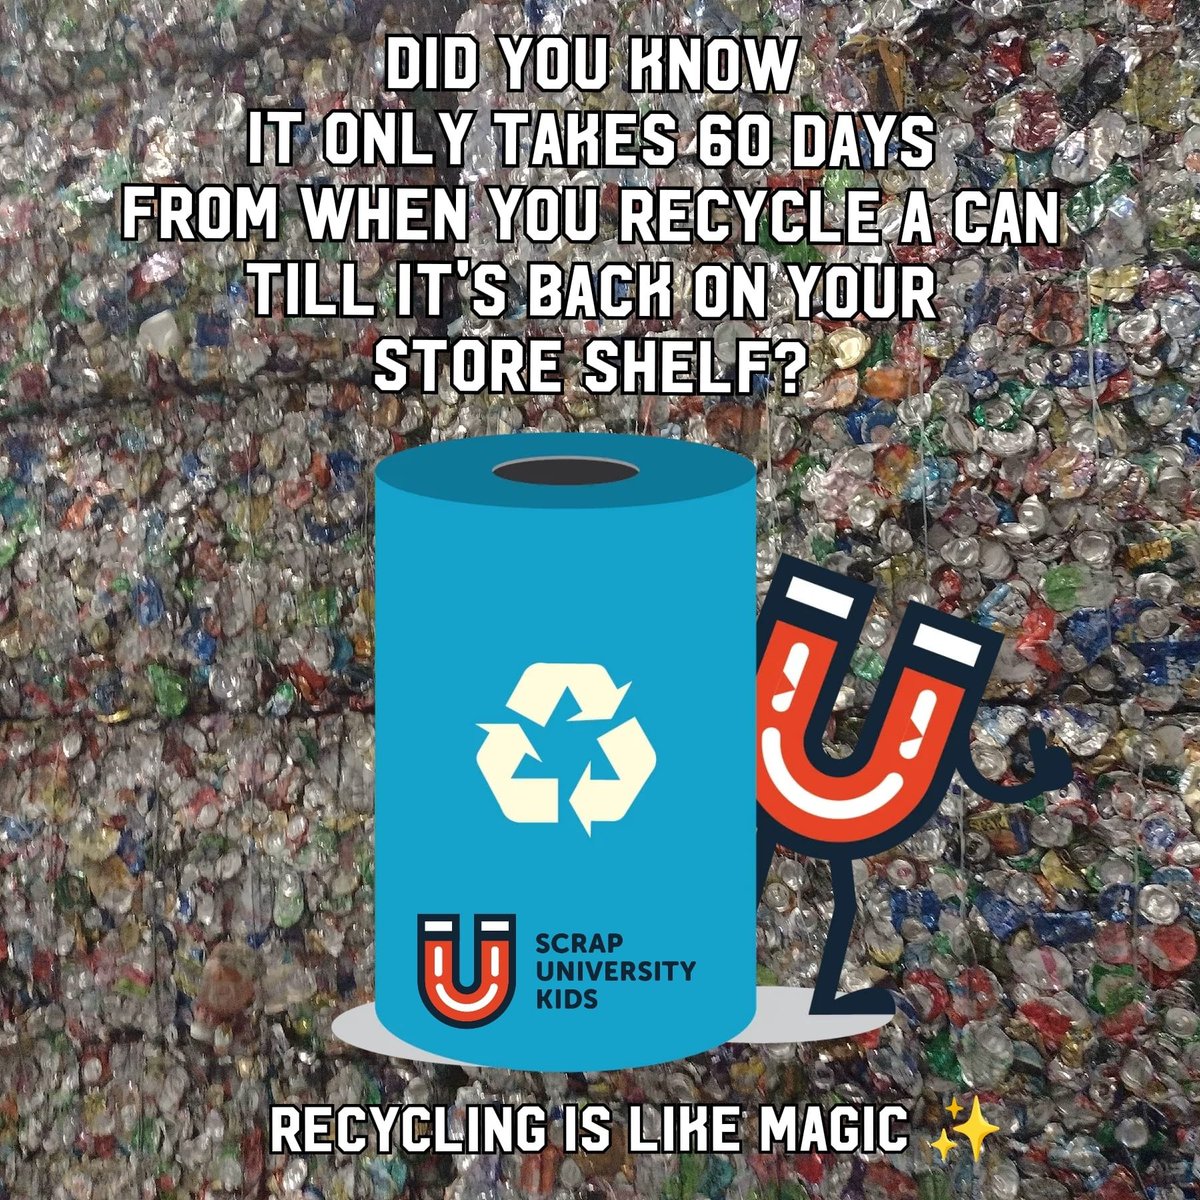 Recycling is like MAGIC🪄♻️! Please remember that ALL Metal Can be recycled! Let's save our planet 1 can at a time! ♻️💚🌍🖖#ScrapUKids #Recycle #Savetheplanet #MetalRecyclesforver